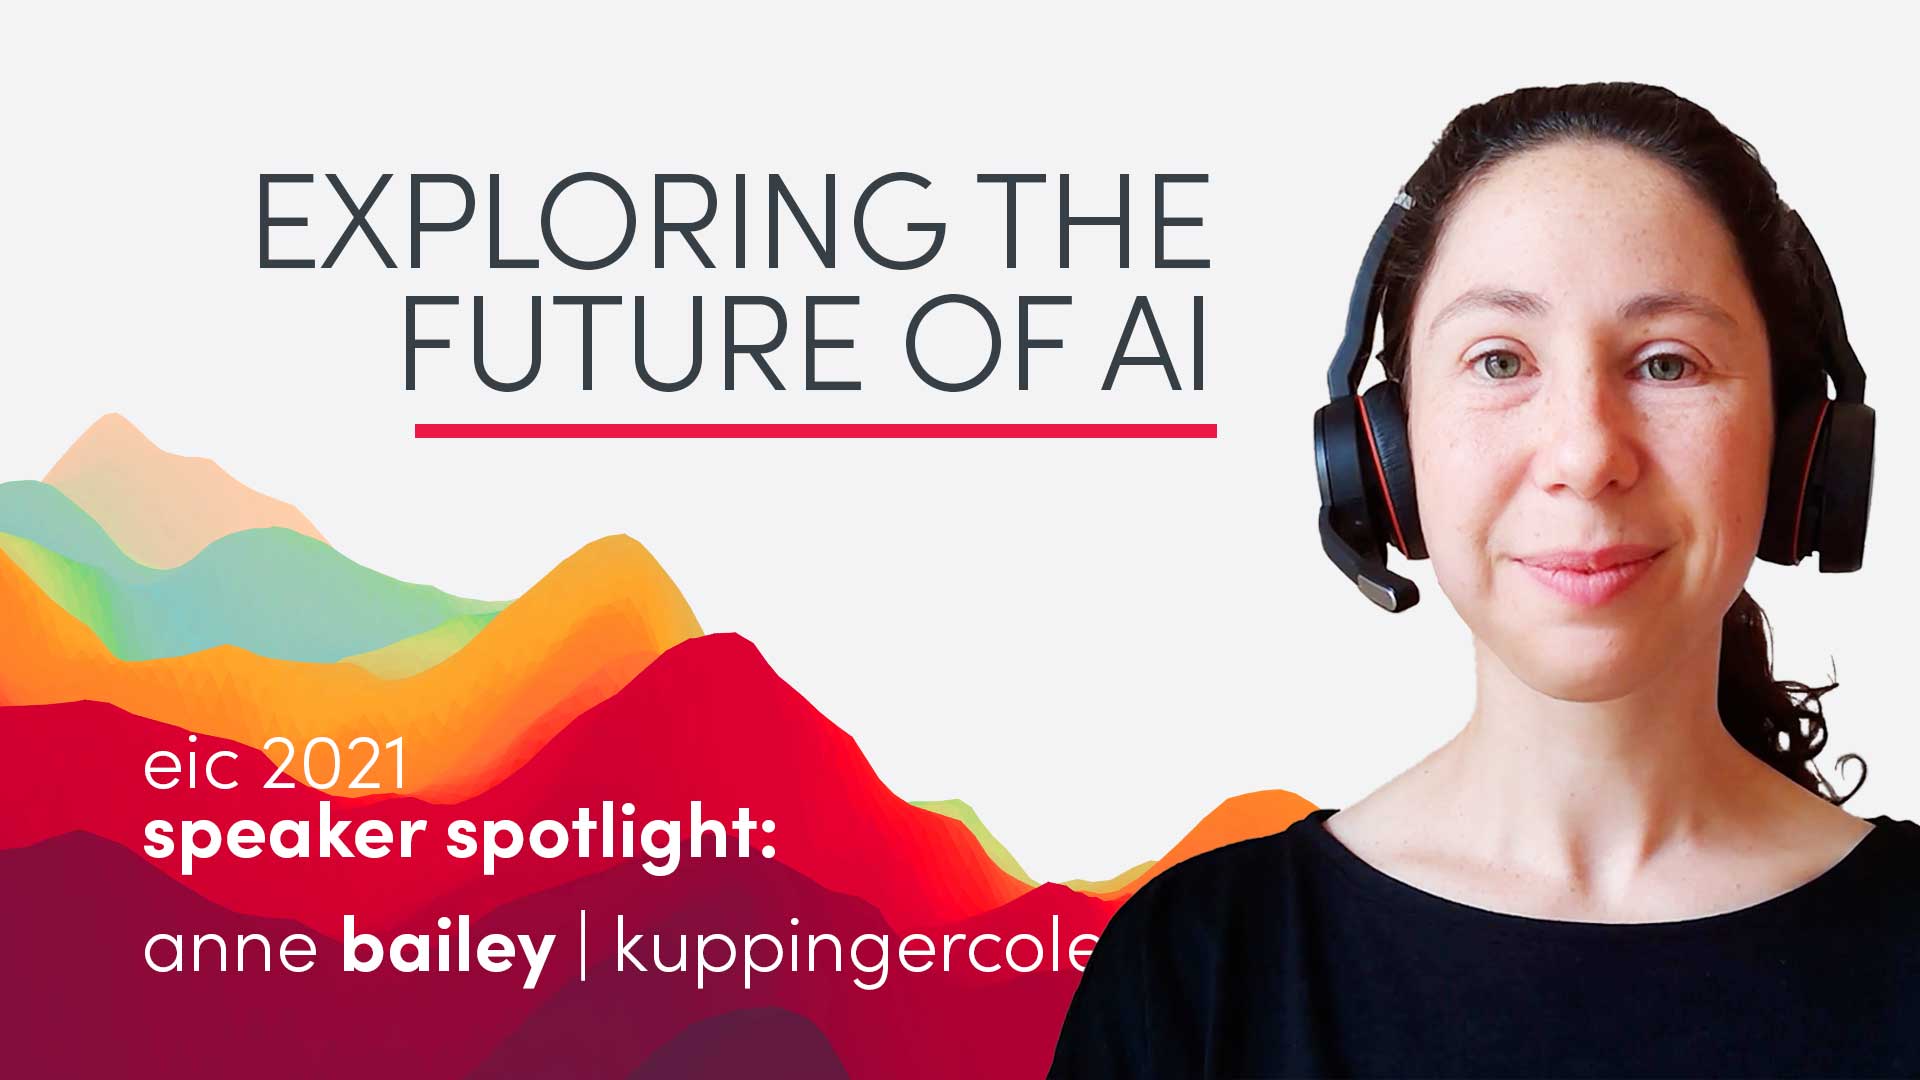 EIC Speaker Spotlight: Annie Bailey on the Future of Artificial Intelligence